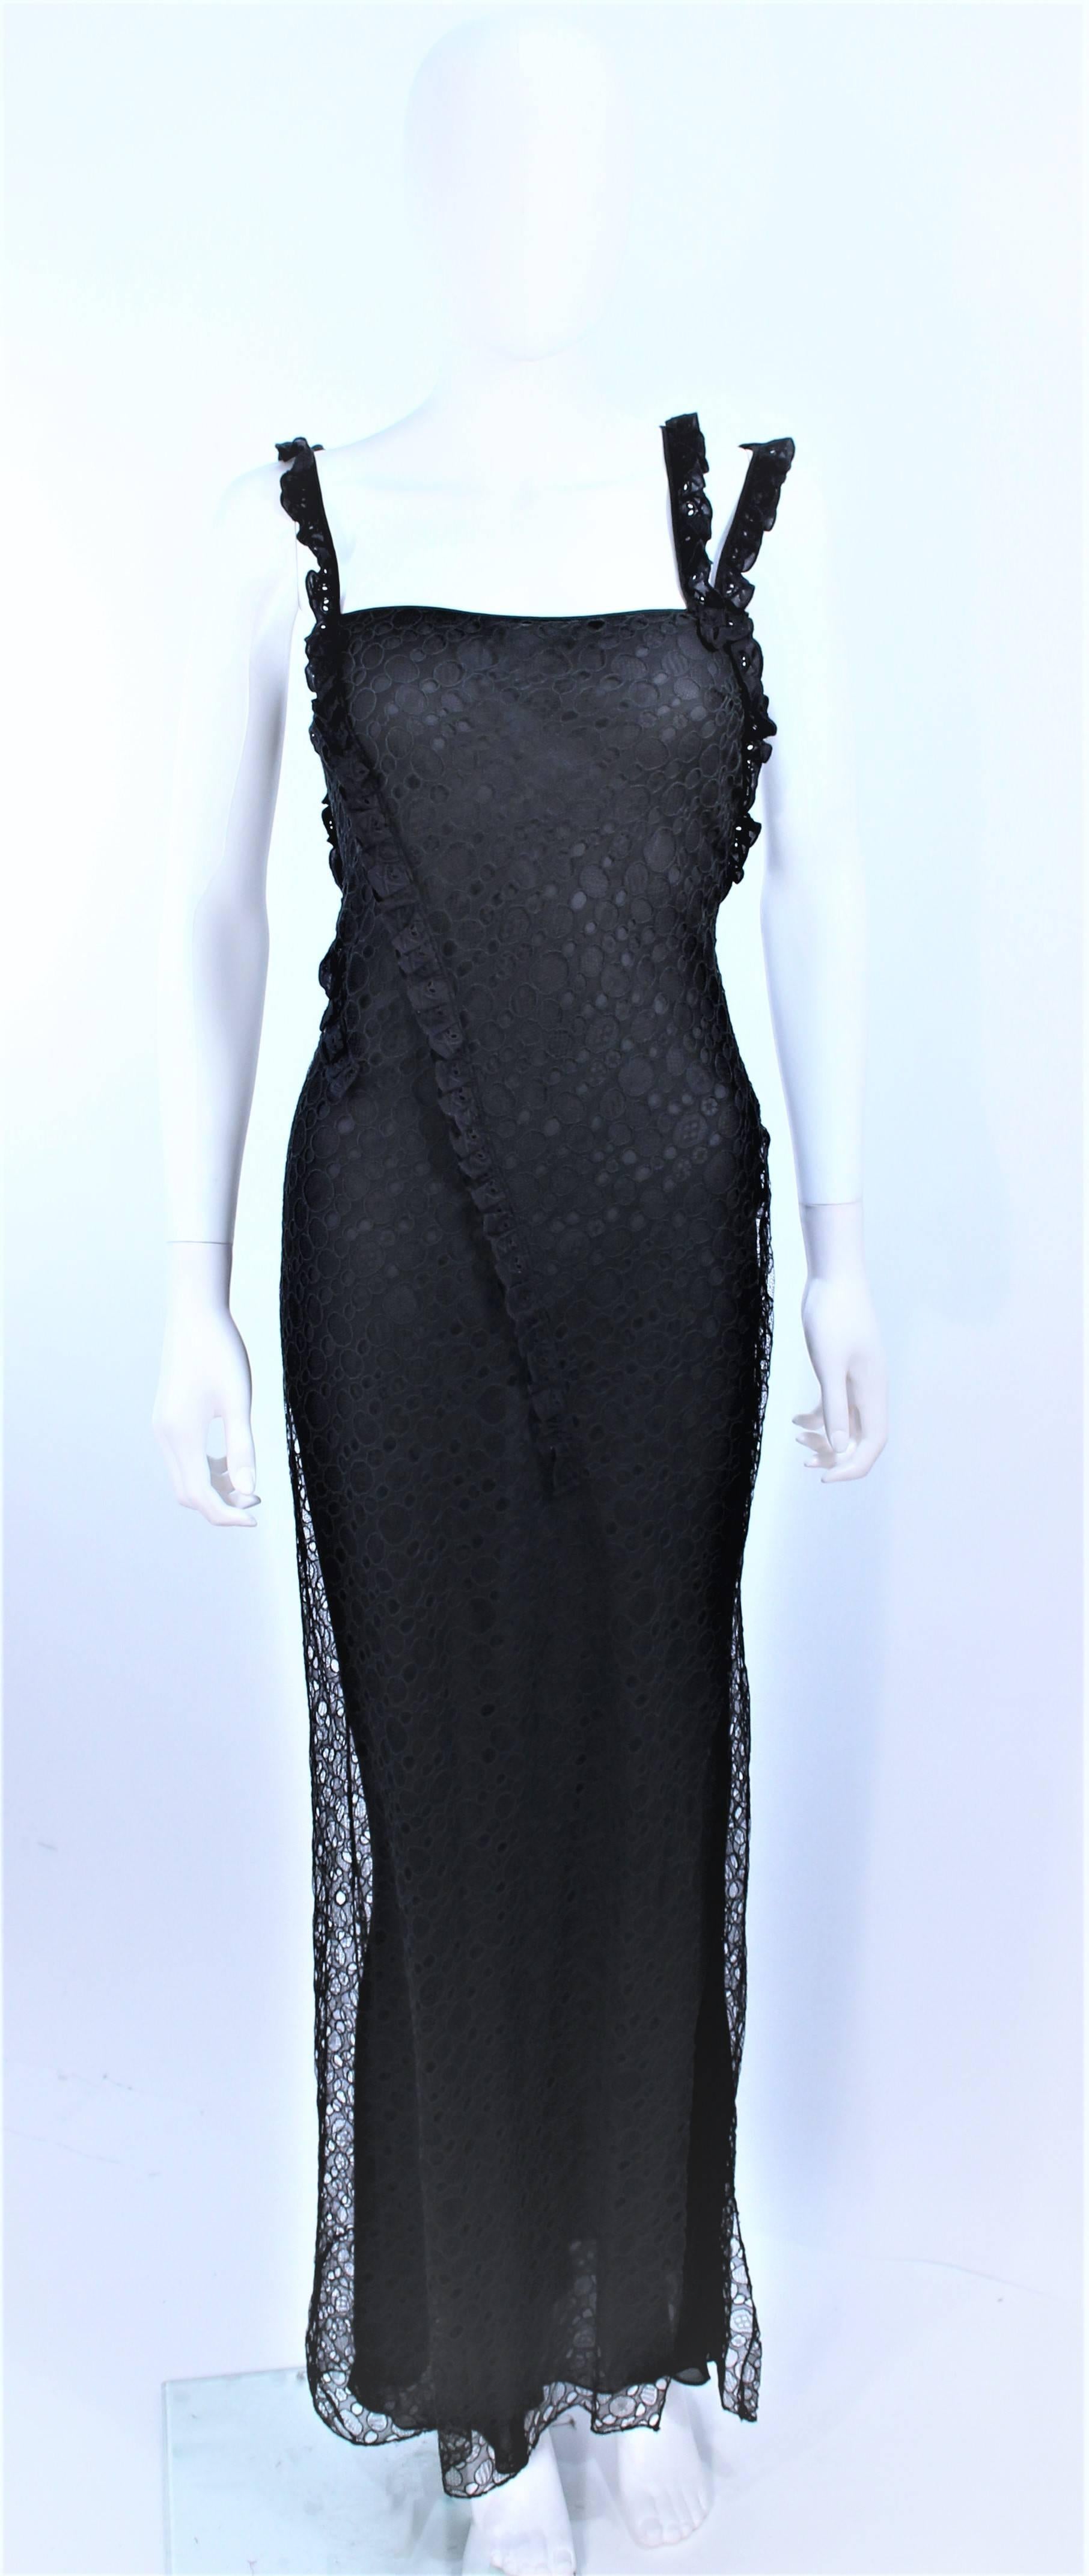 This John Galliano gown is composed of a black silk and silk eyelet lace with a bias cut design. There is a side zipper closure. In excellent pre-owned condition.

**Please cross-reference measurements for personal accuracy. Size in description